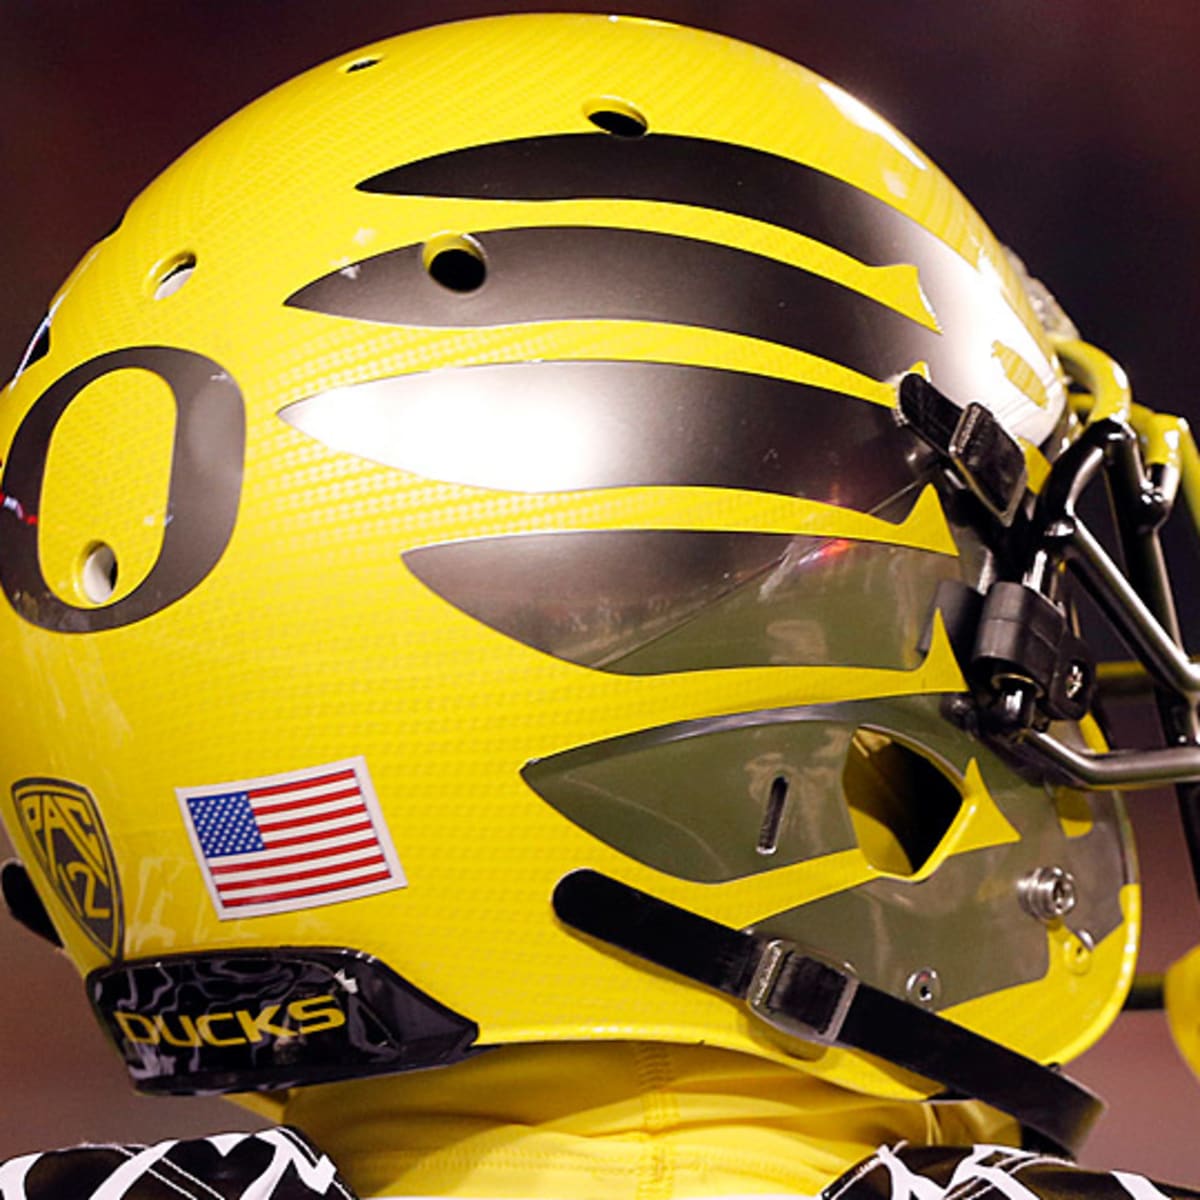 2012 Oregon Lime Green and Black Unis with Yellow Helmets